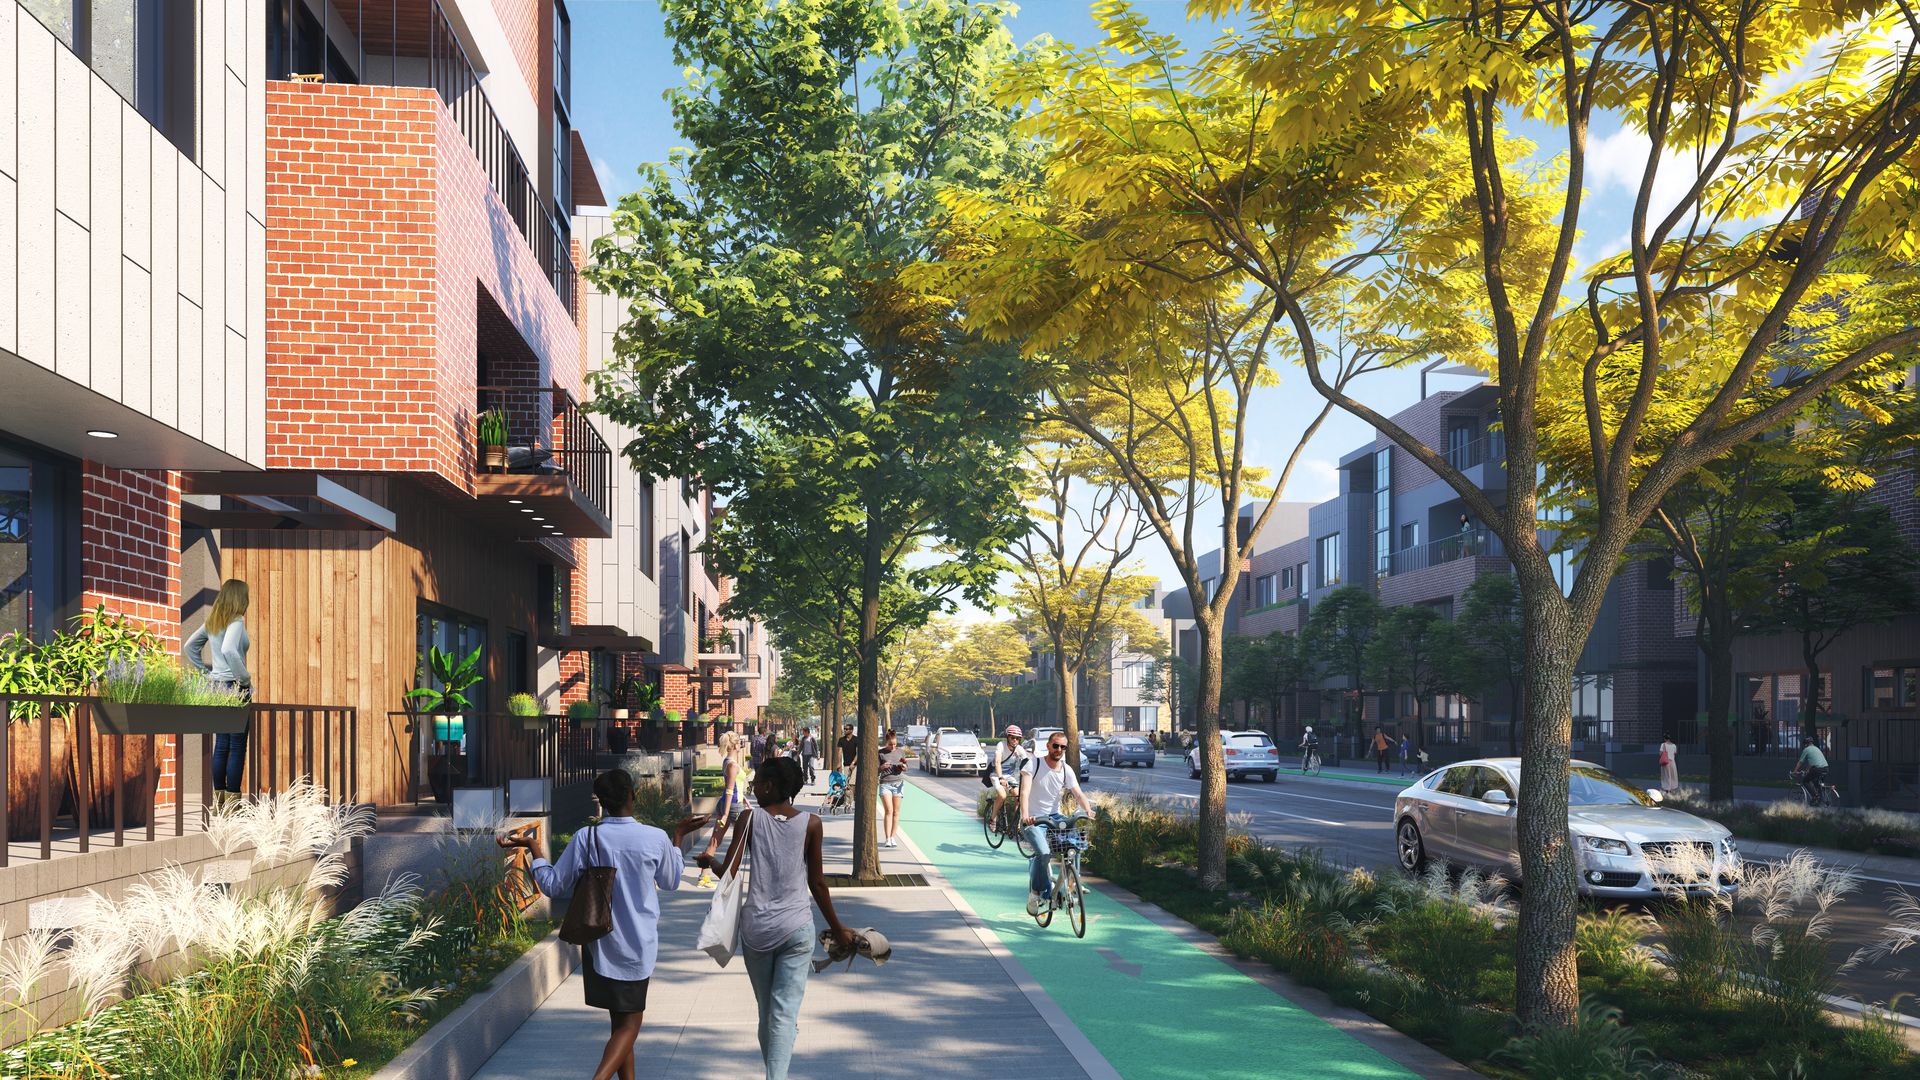 A rendering of a bike lane planned for the East Bank.